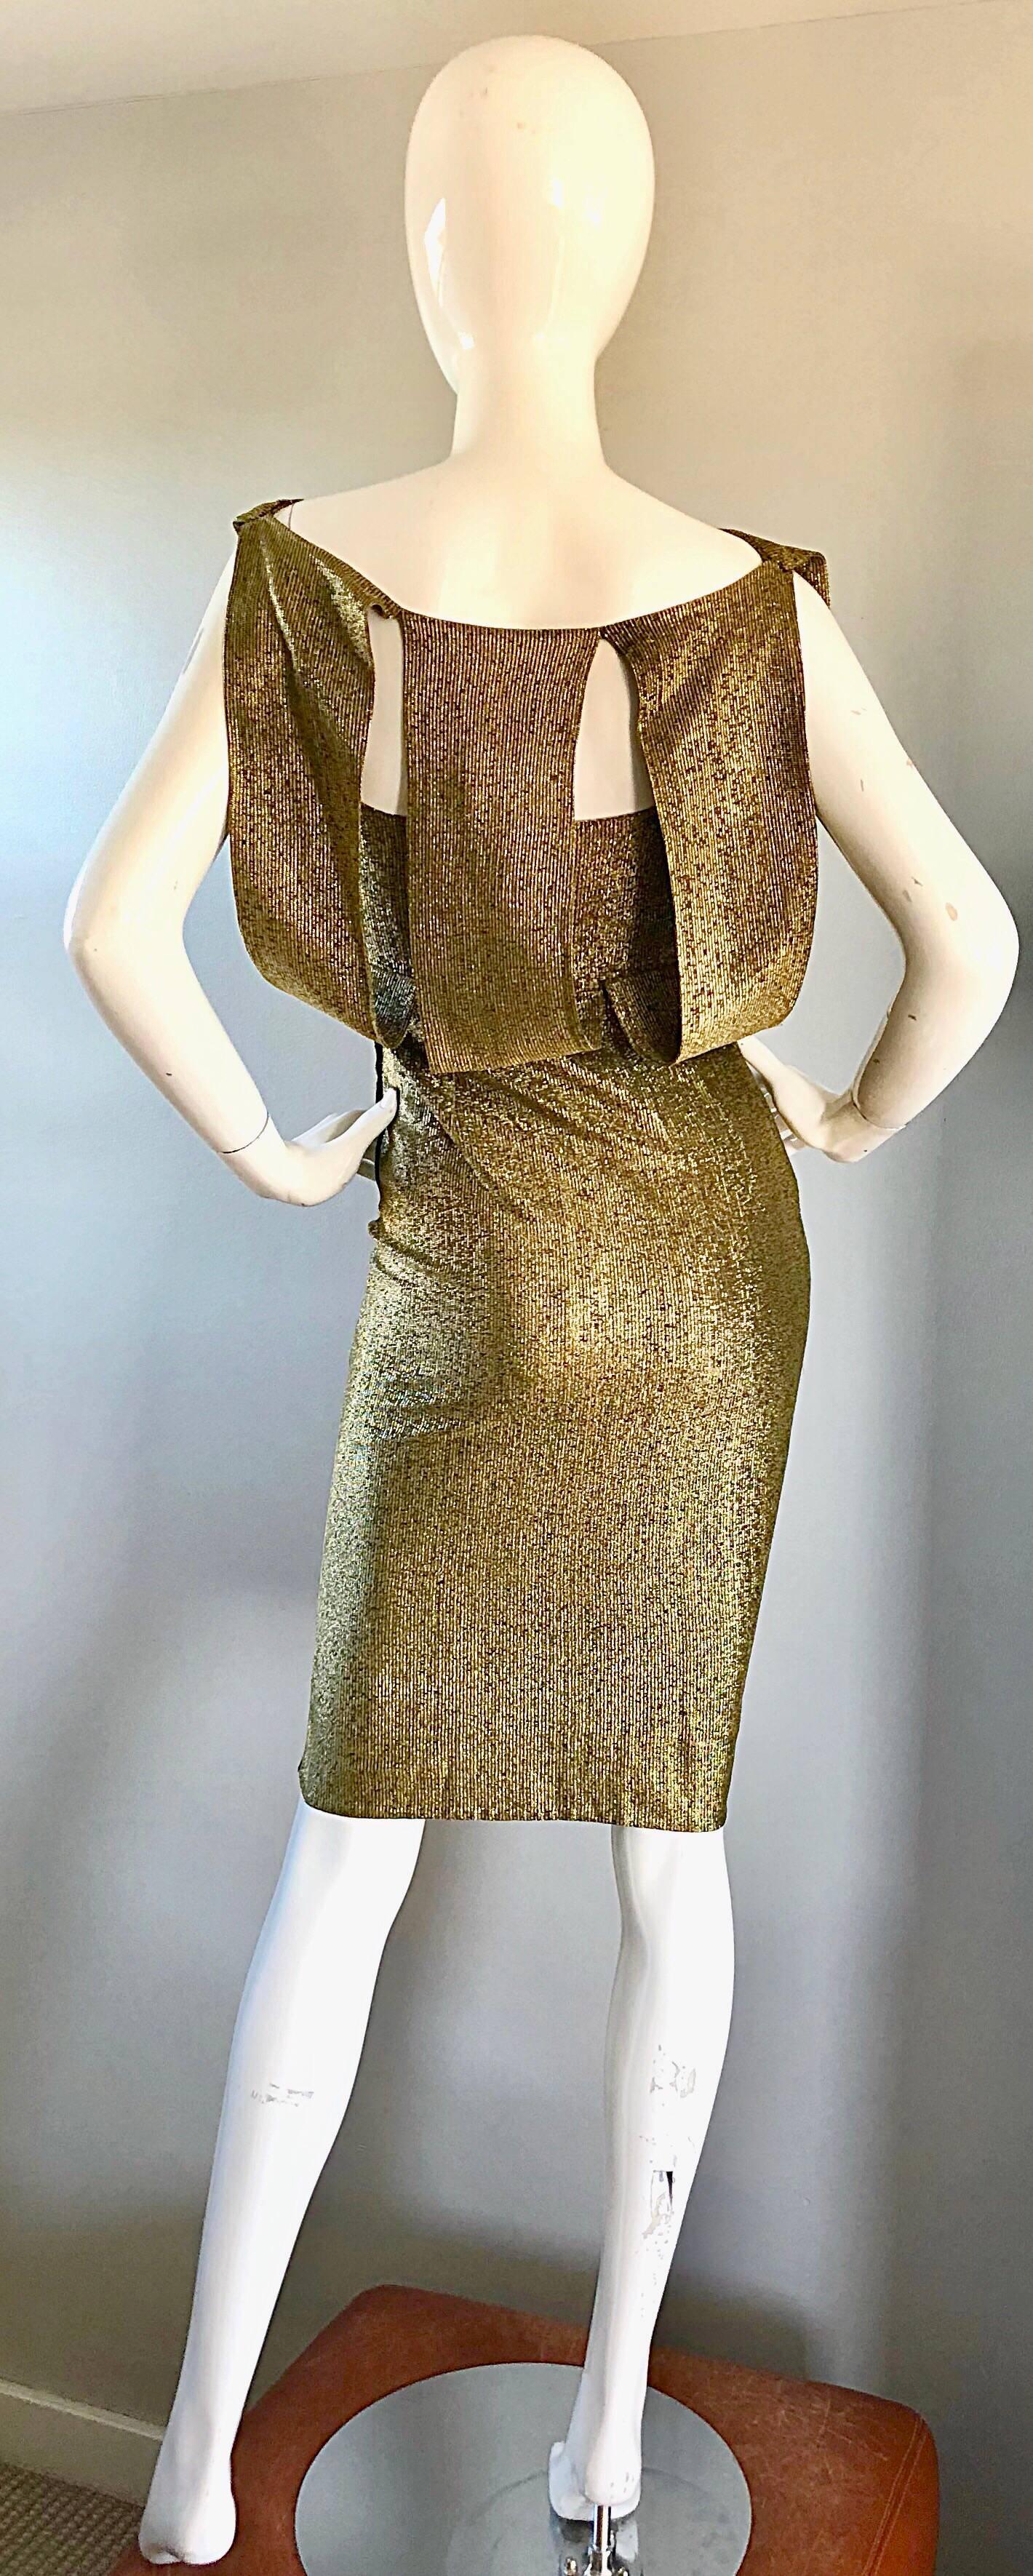 Gorgeous 1950s gold metallic silk Avant Garde cut-out back demi couture wiggle dress! Features a form fitting fit. Cut-outs on the back reveals just the right amount of skin. Dramatic sleeveless lines. Hidden zipper up the side with hook-and-eye